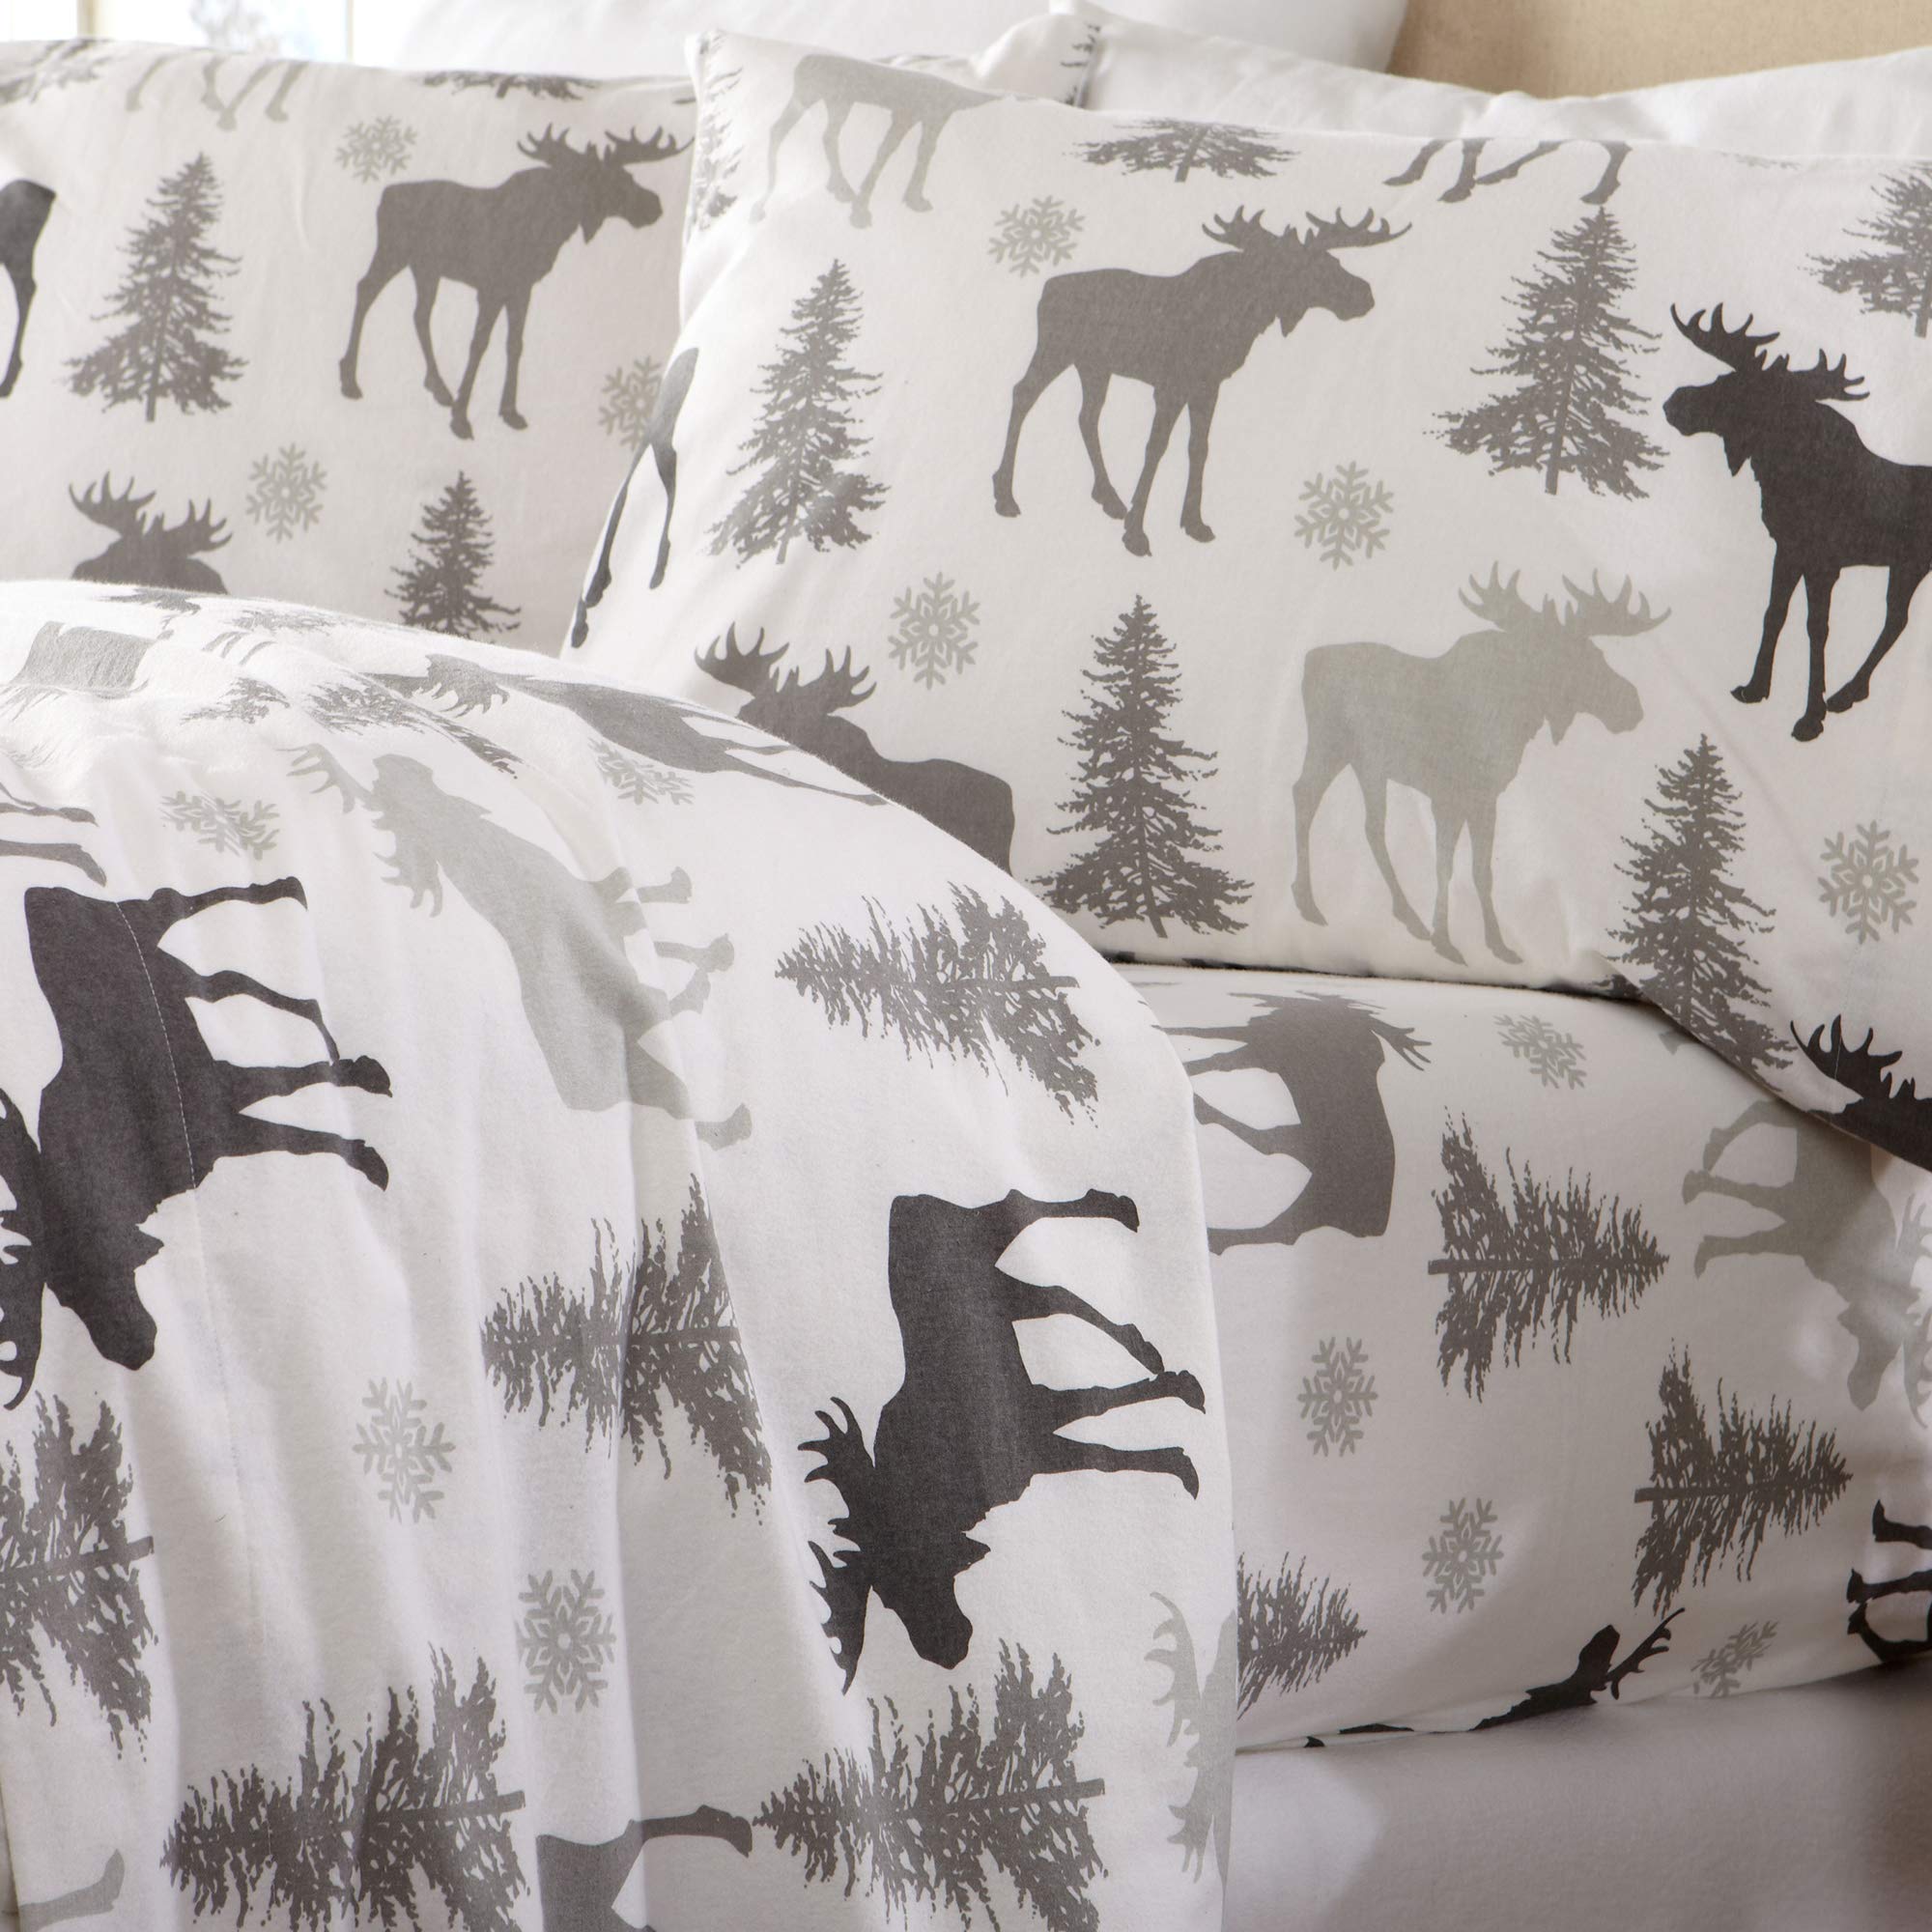 Book Cover Flannel Sheets King Winter Bed Sheets Flannel Sheet Set Moose Flannel Sheets 100% Turkish Cotton Flannel Sheet Set. Stratton Collection (King, Moose)